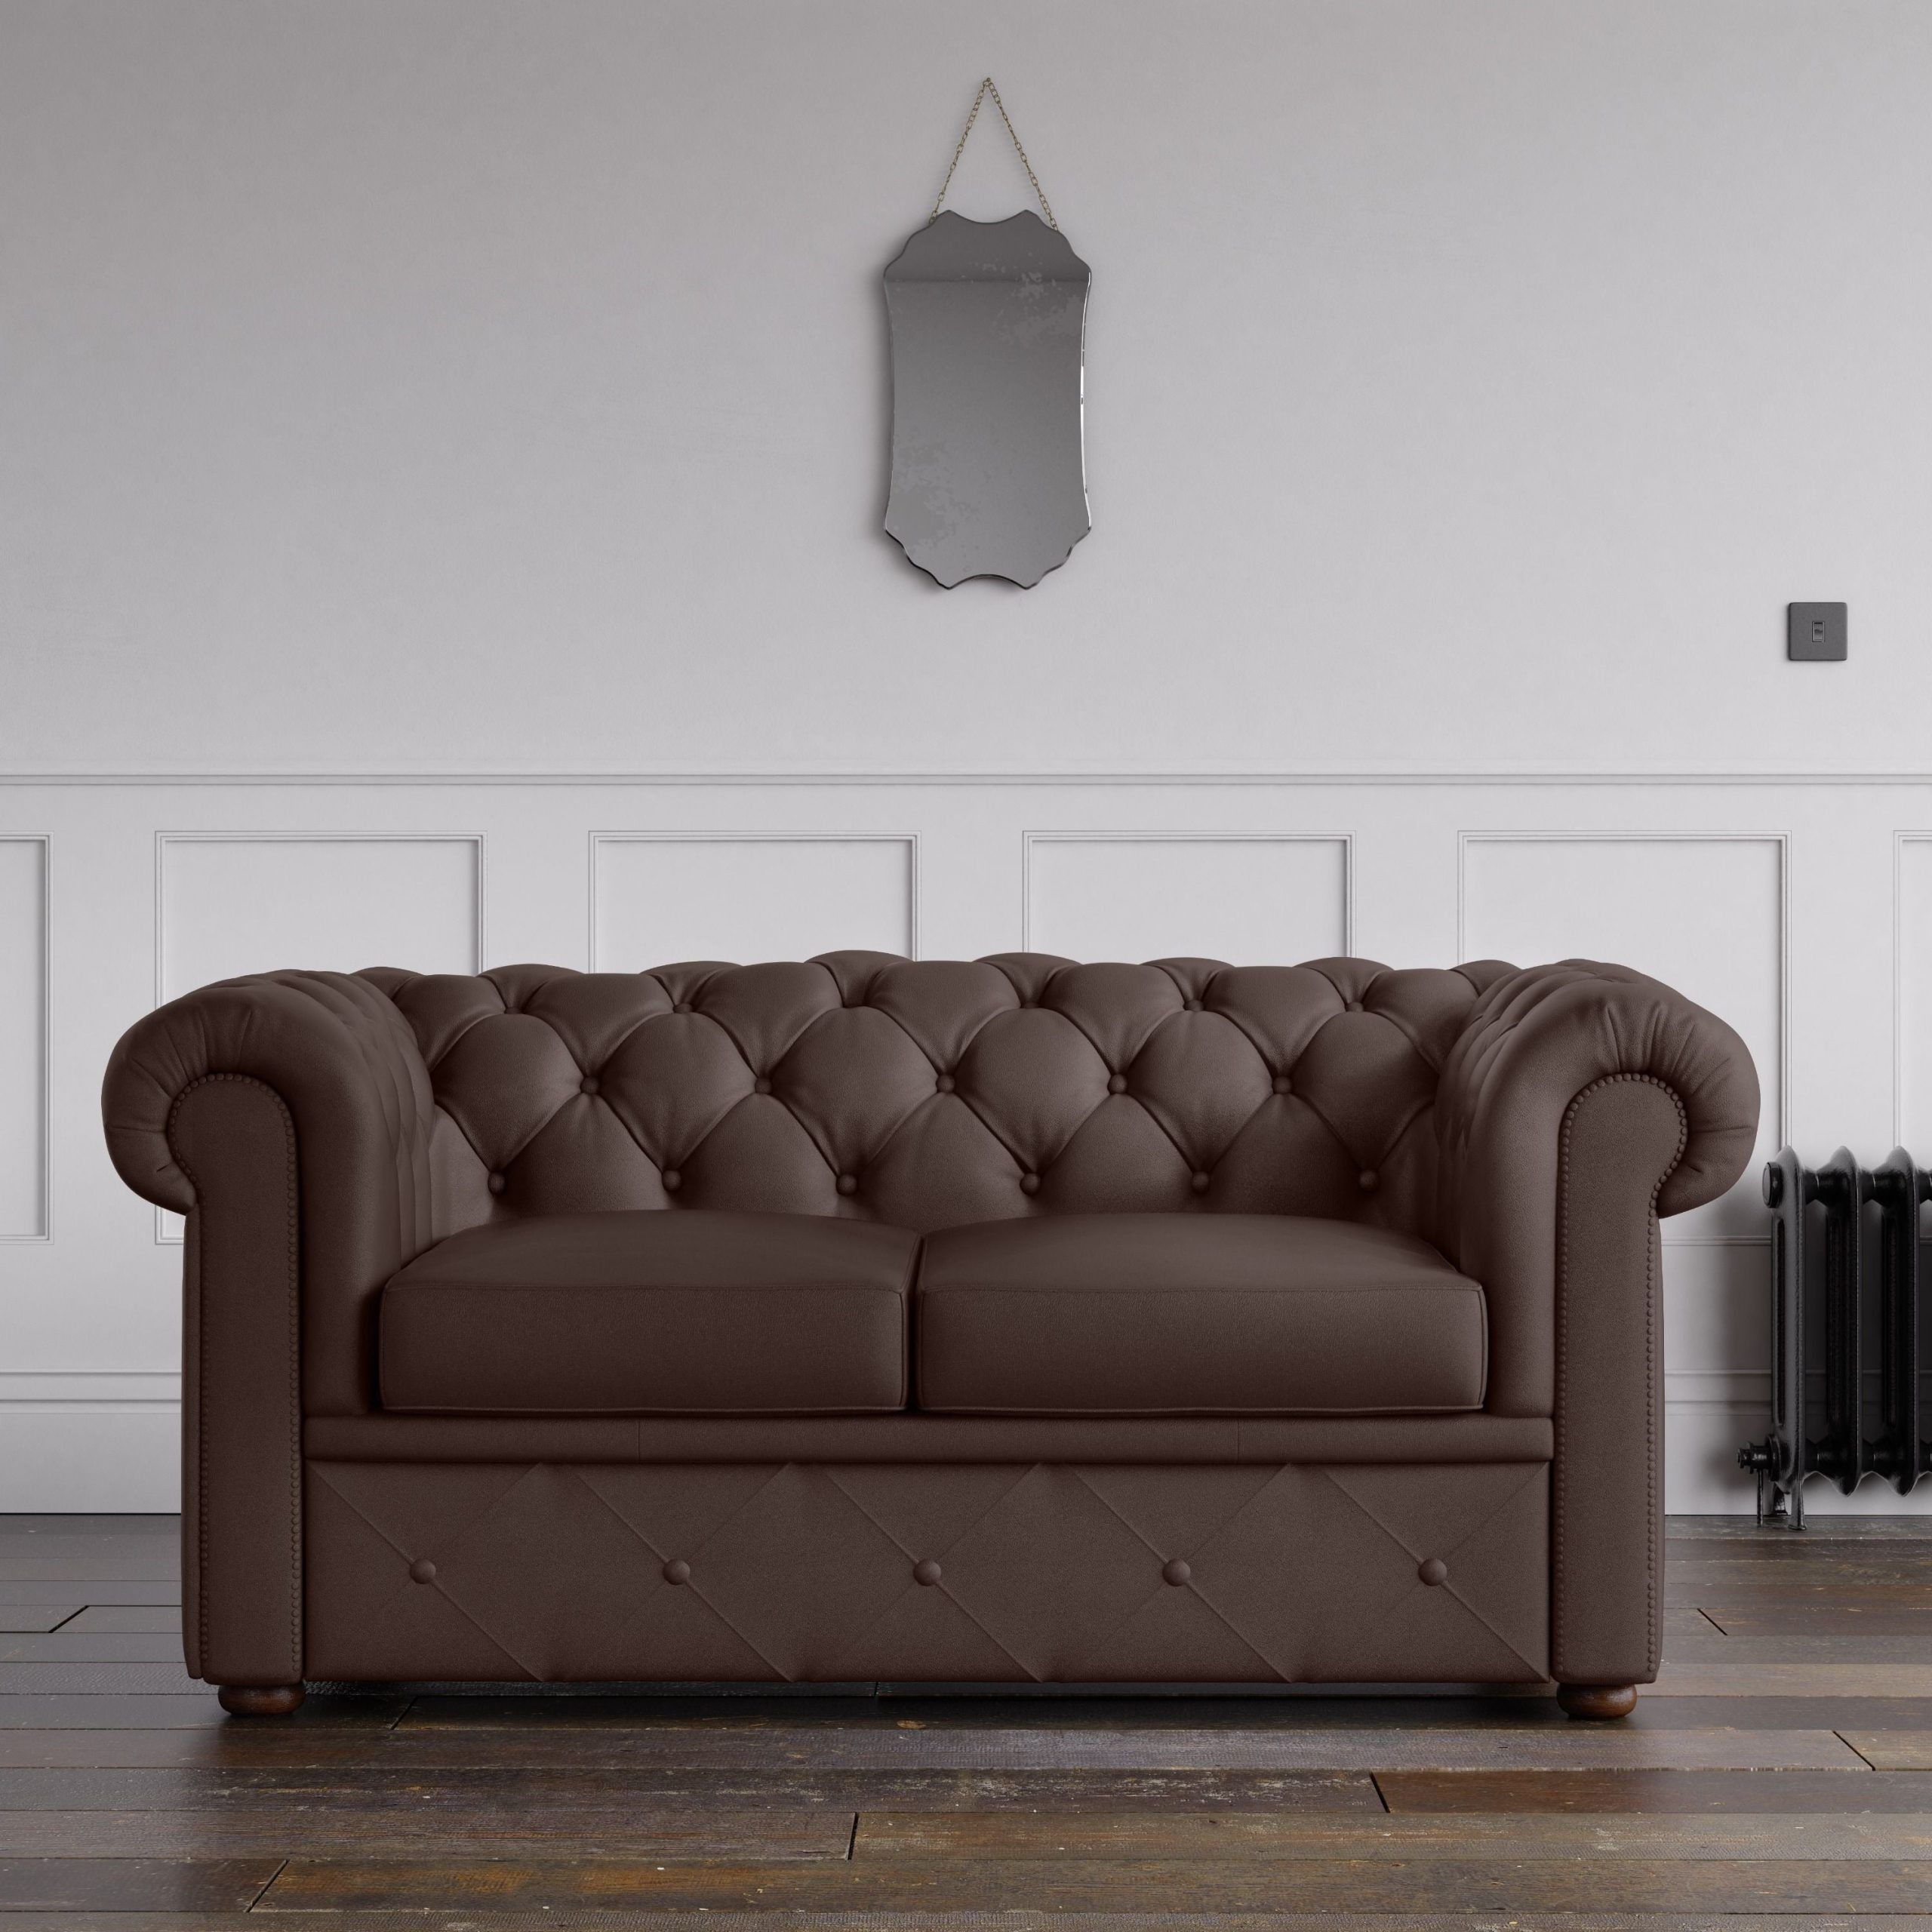 Chesterfield Faux Leather Sofa Chocolate – Endure Fabrics Intended For Faux Leather Sofas In Chocolate Brown (View 3 of 20)